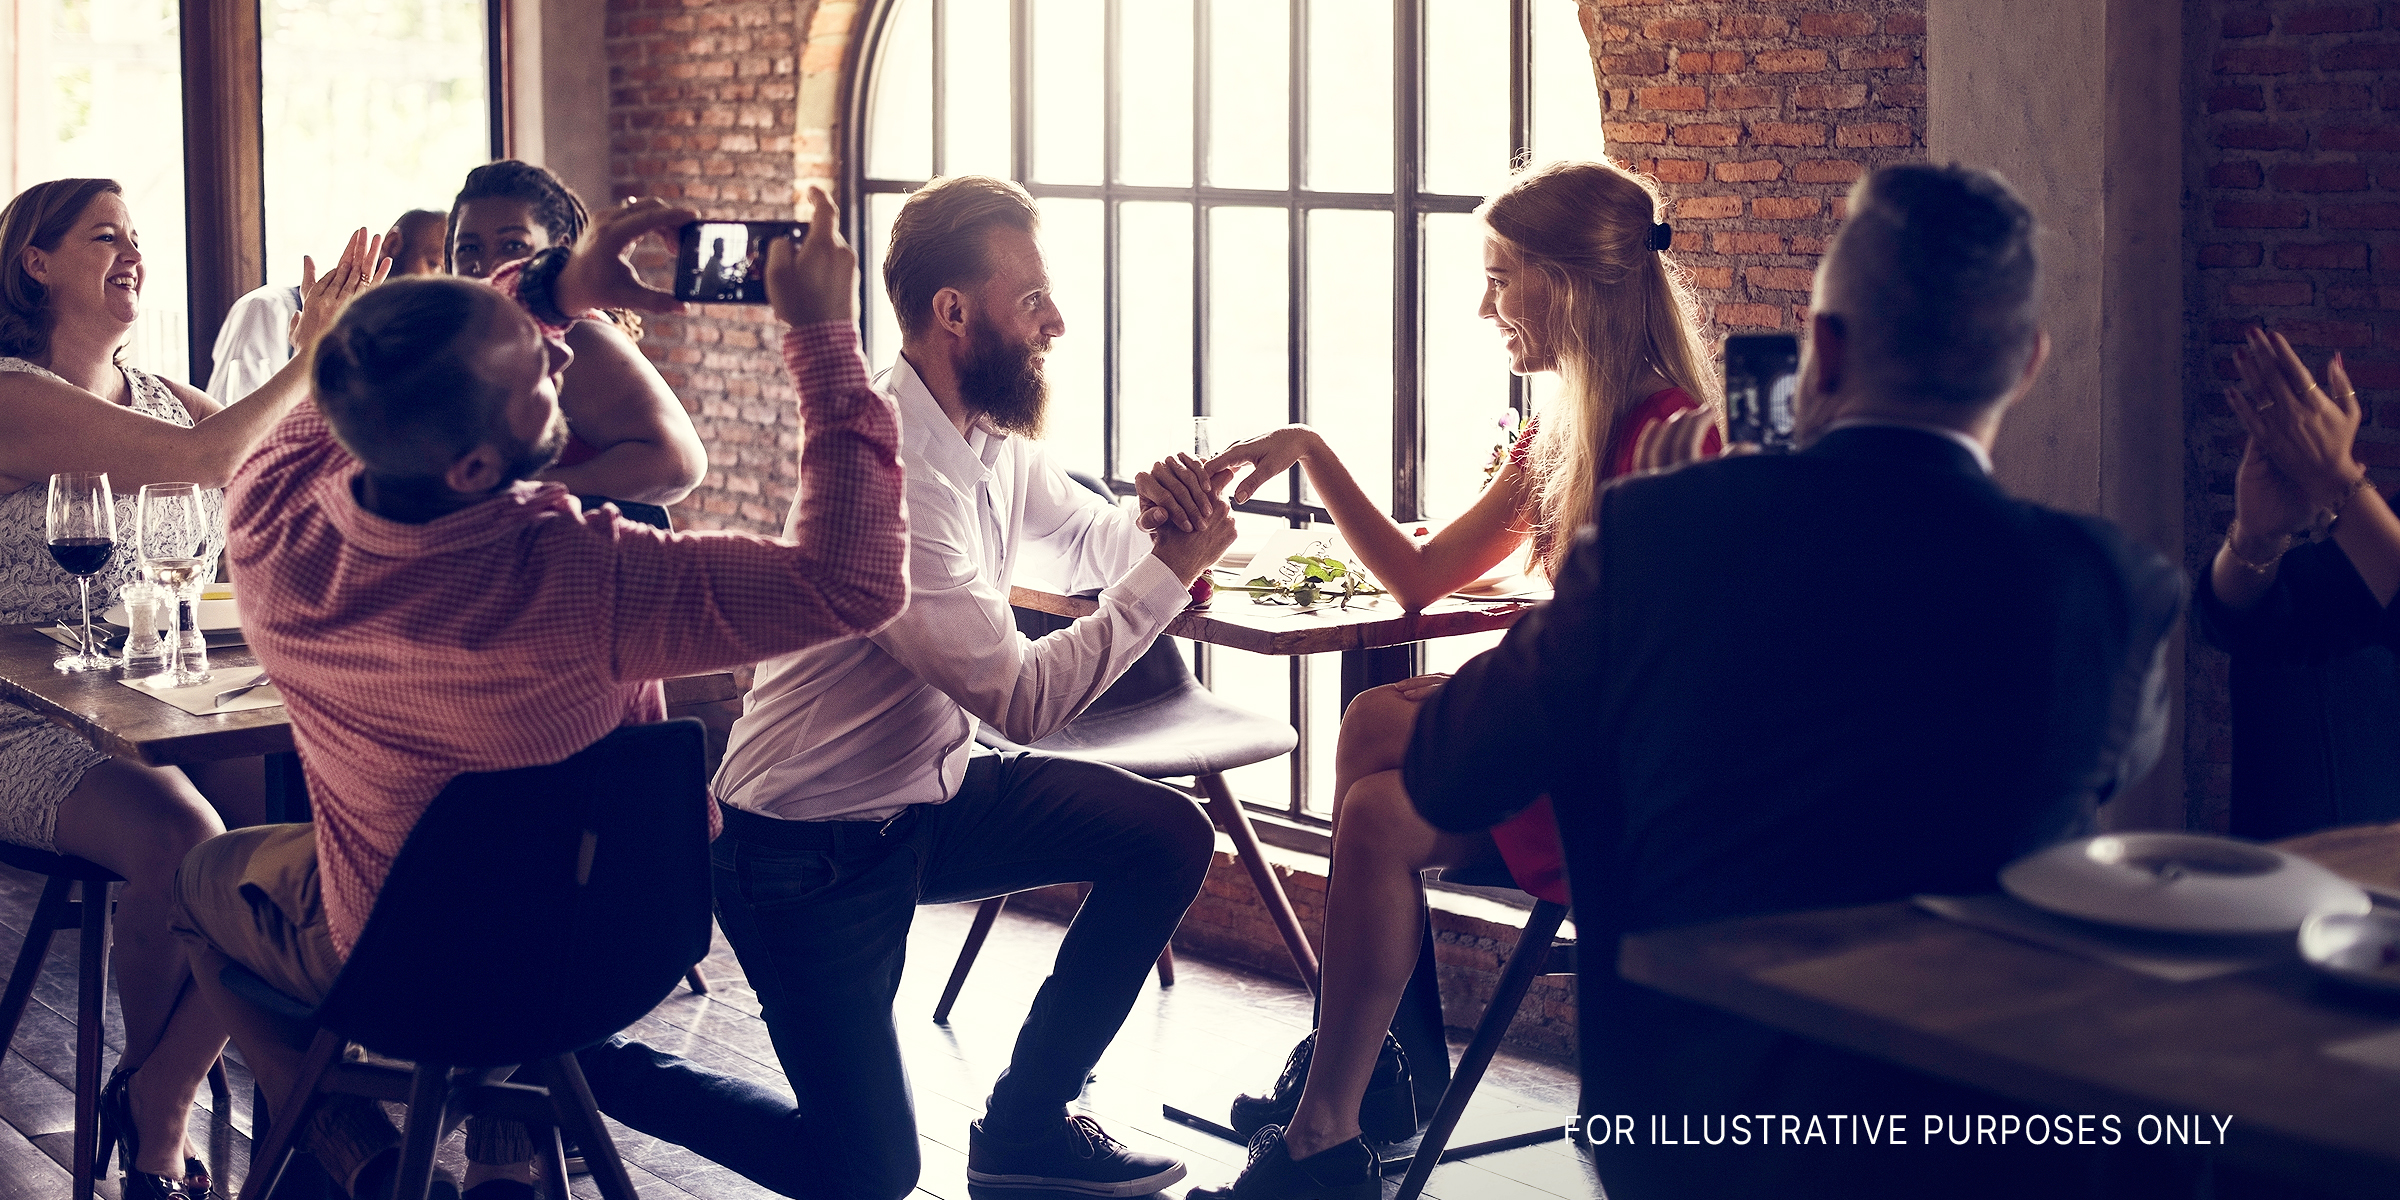 Man on his knee, proposing at a restaurant. | Source: Shutterstock